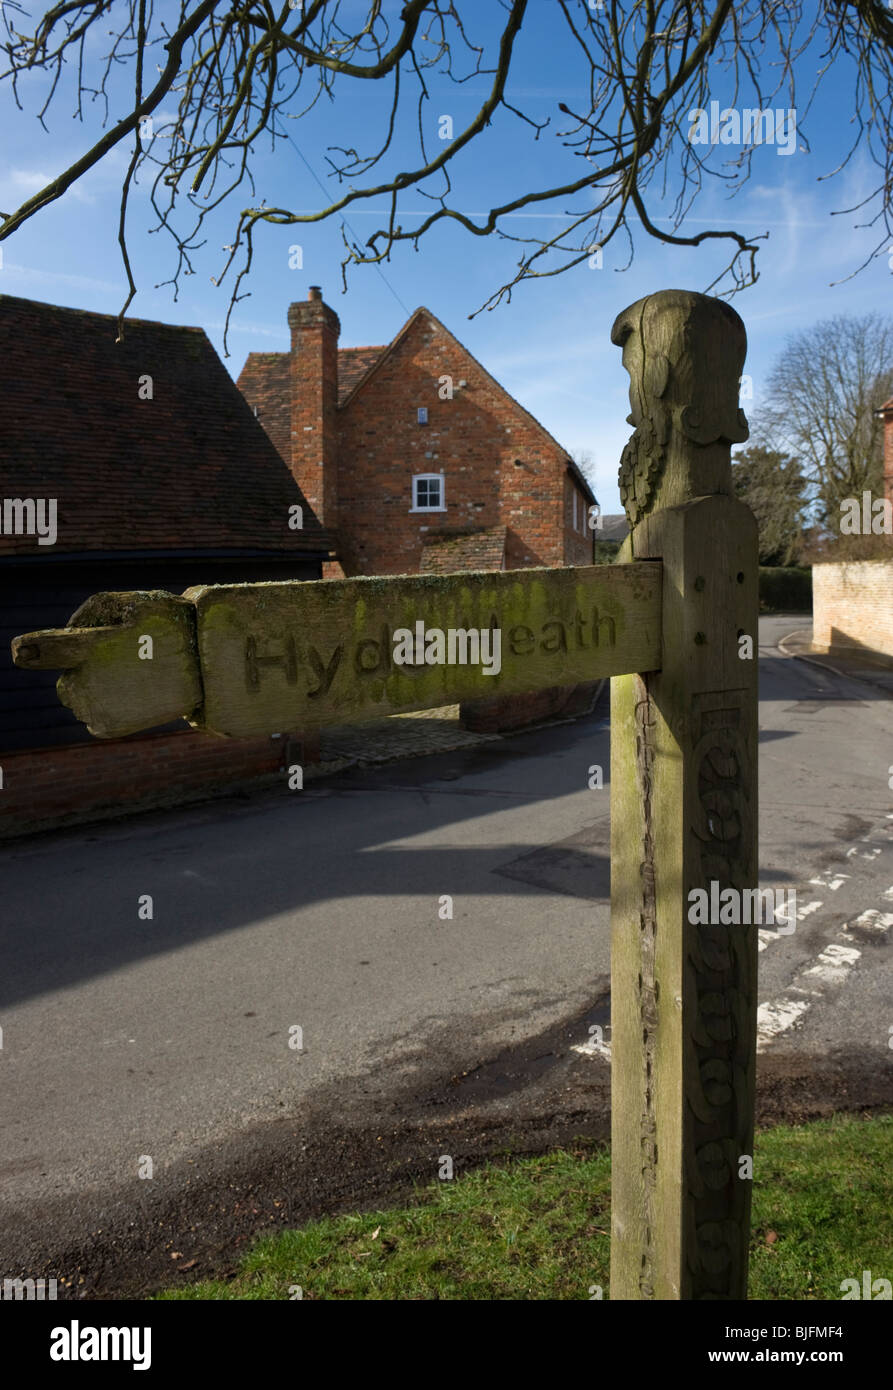 A street sign in the shape of an unusual carved wooden signpost in Little Missenden Buckinghamshire UK Stock Photo